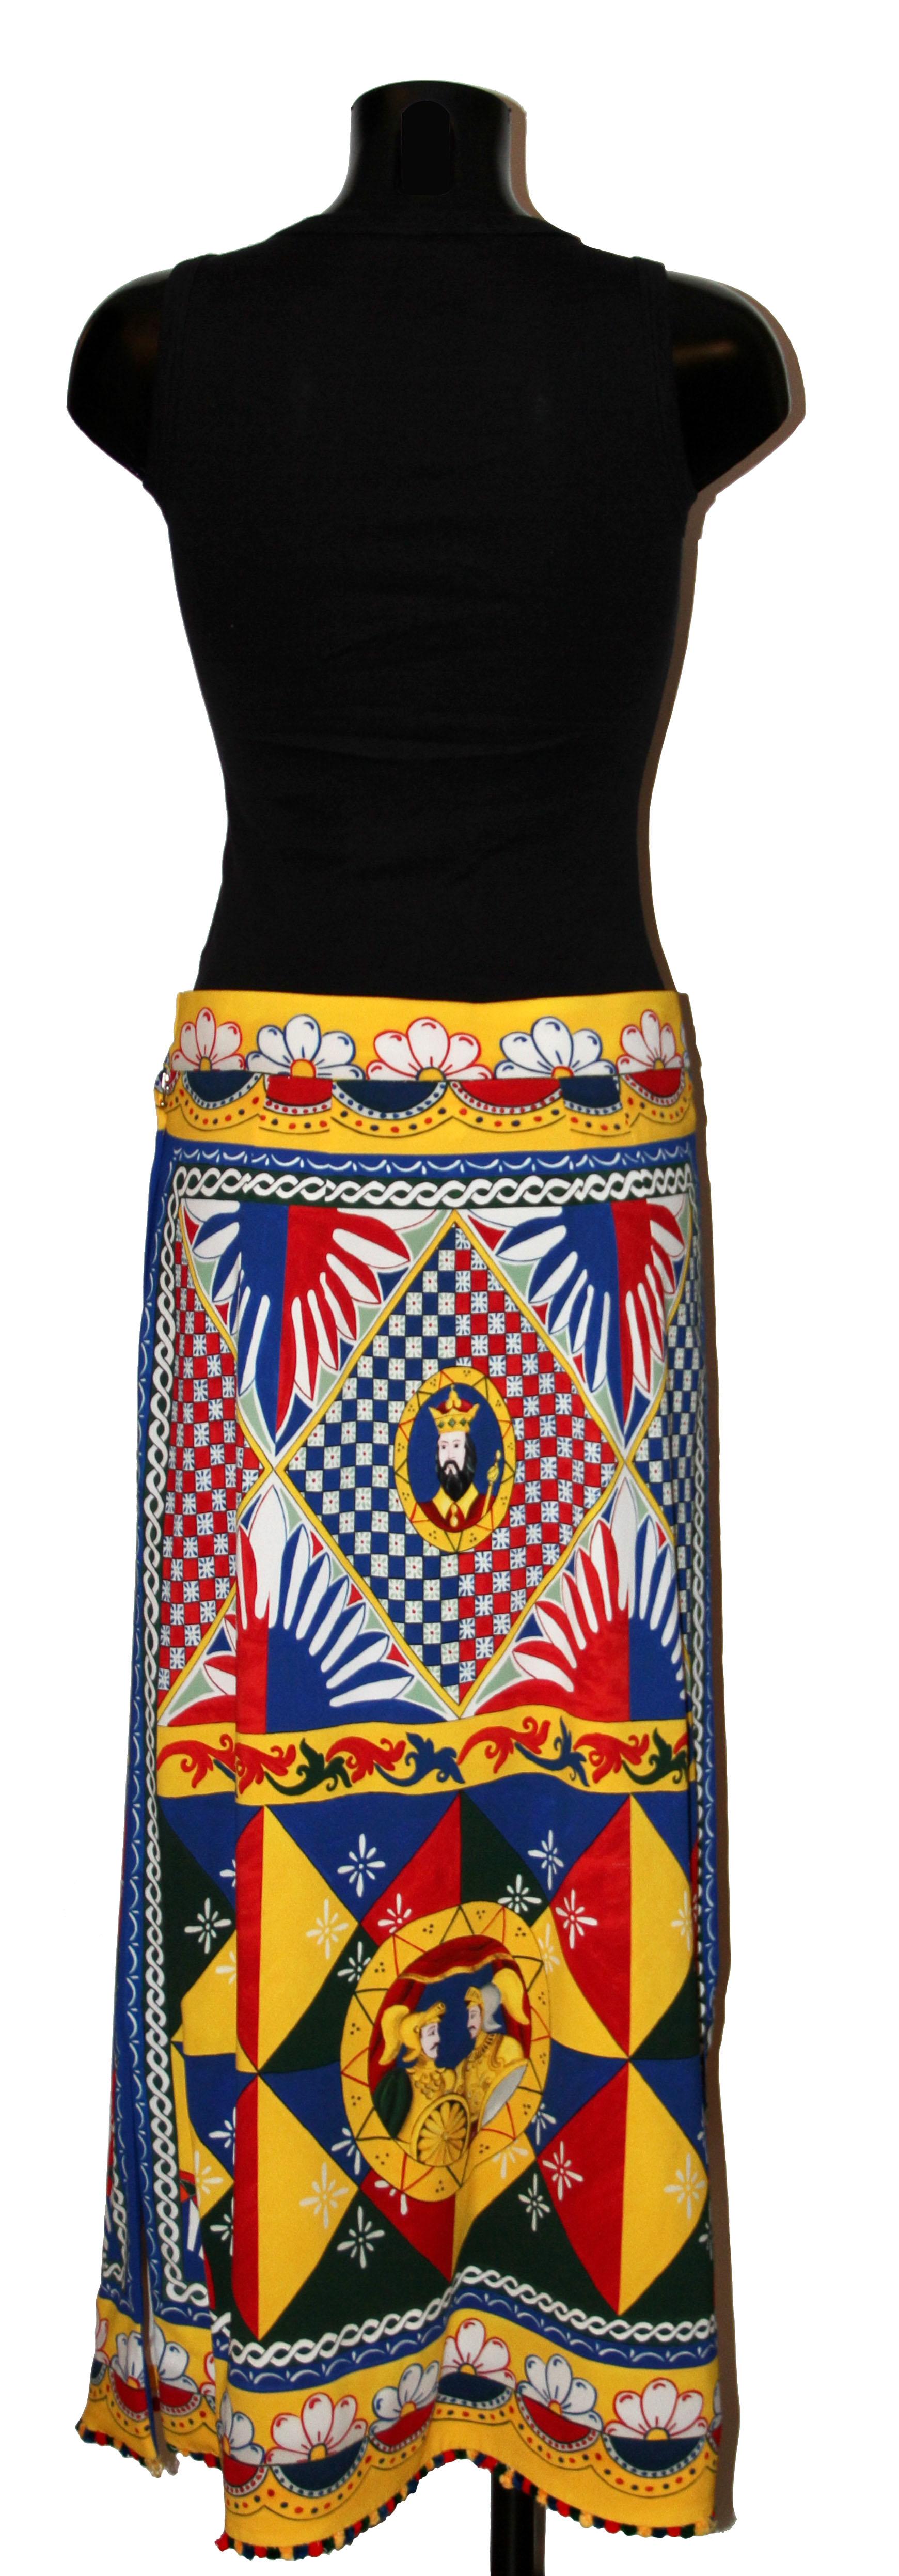 This pre-owned colored long skirt is printed with universe of kings and knights pictures 

Fabric: 97% rayon, 3% elastane
Doublure: 96% silk, 4% elastane
Embroidery: 100% polyester
Couleur: red, yellow, blue
Size: 40
Measurements: Waist: 41 cms -